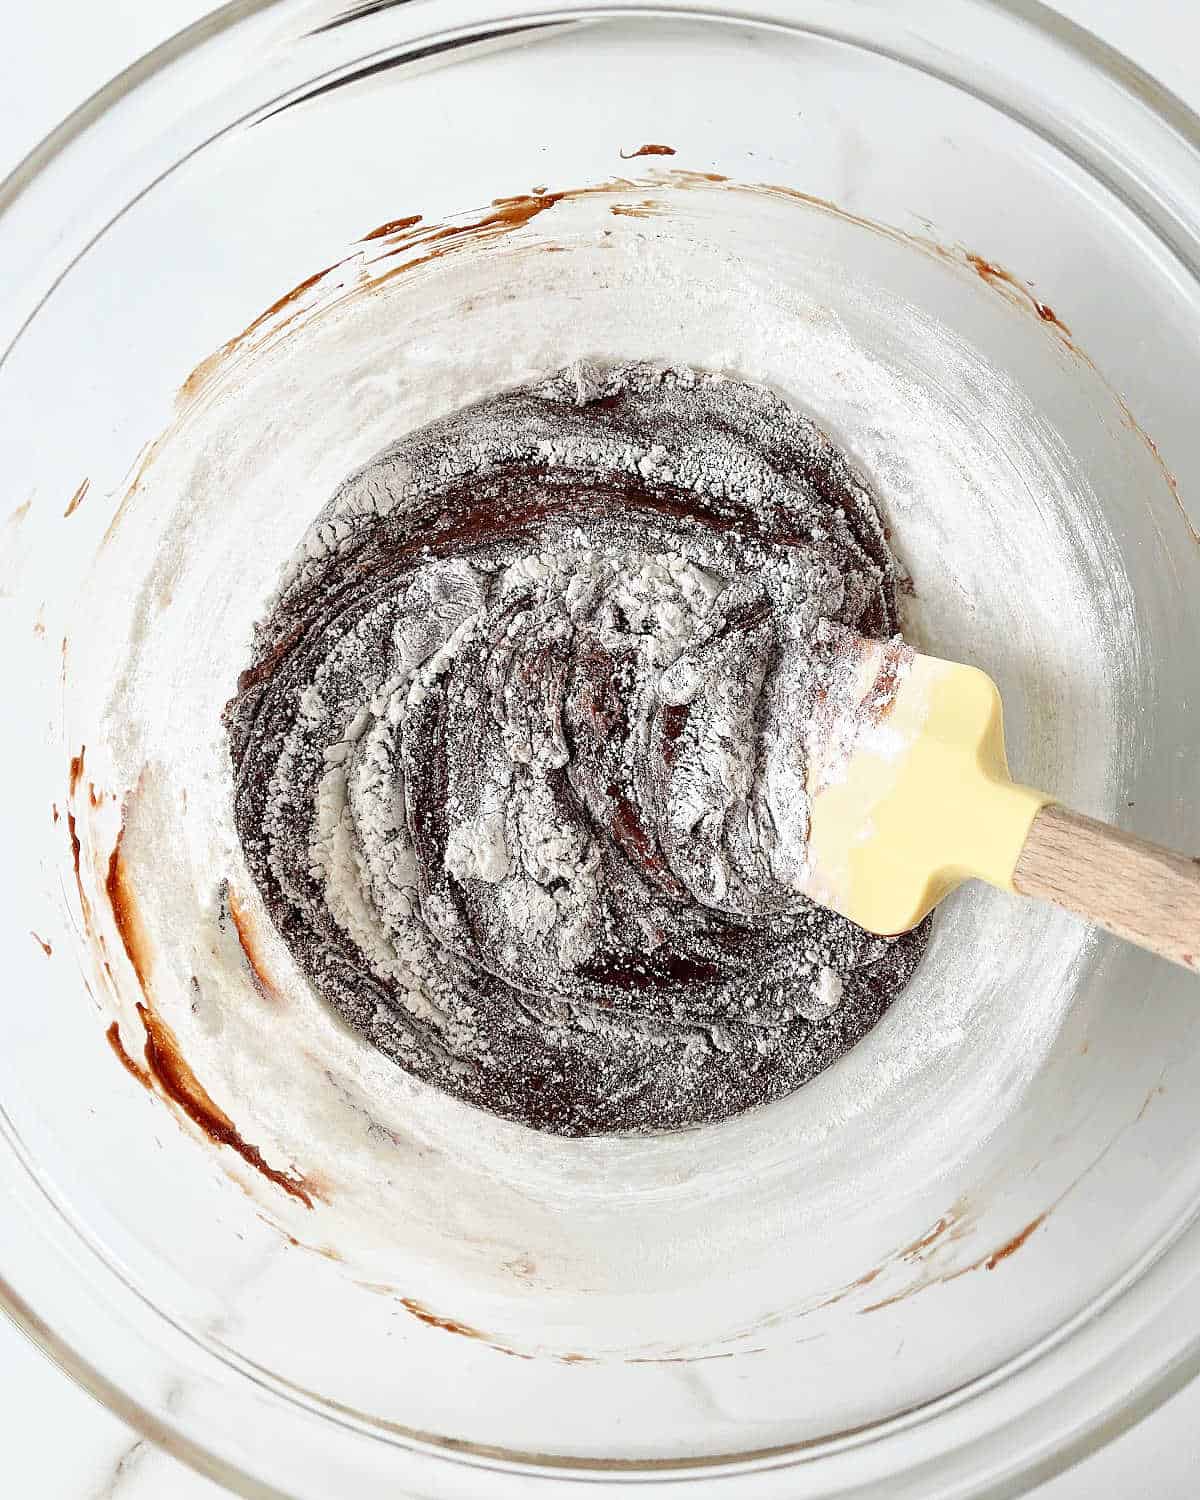 Flour stirred white a yellow spatula into a chocolate batter in a glass bowl.